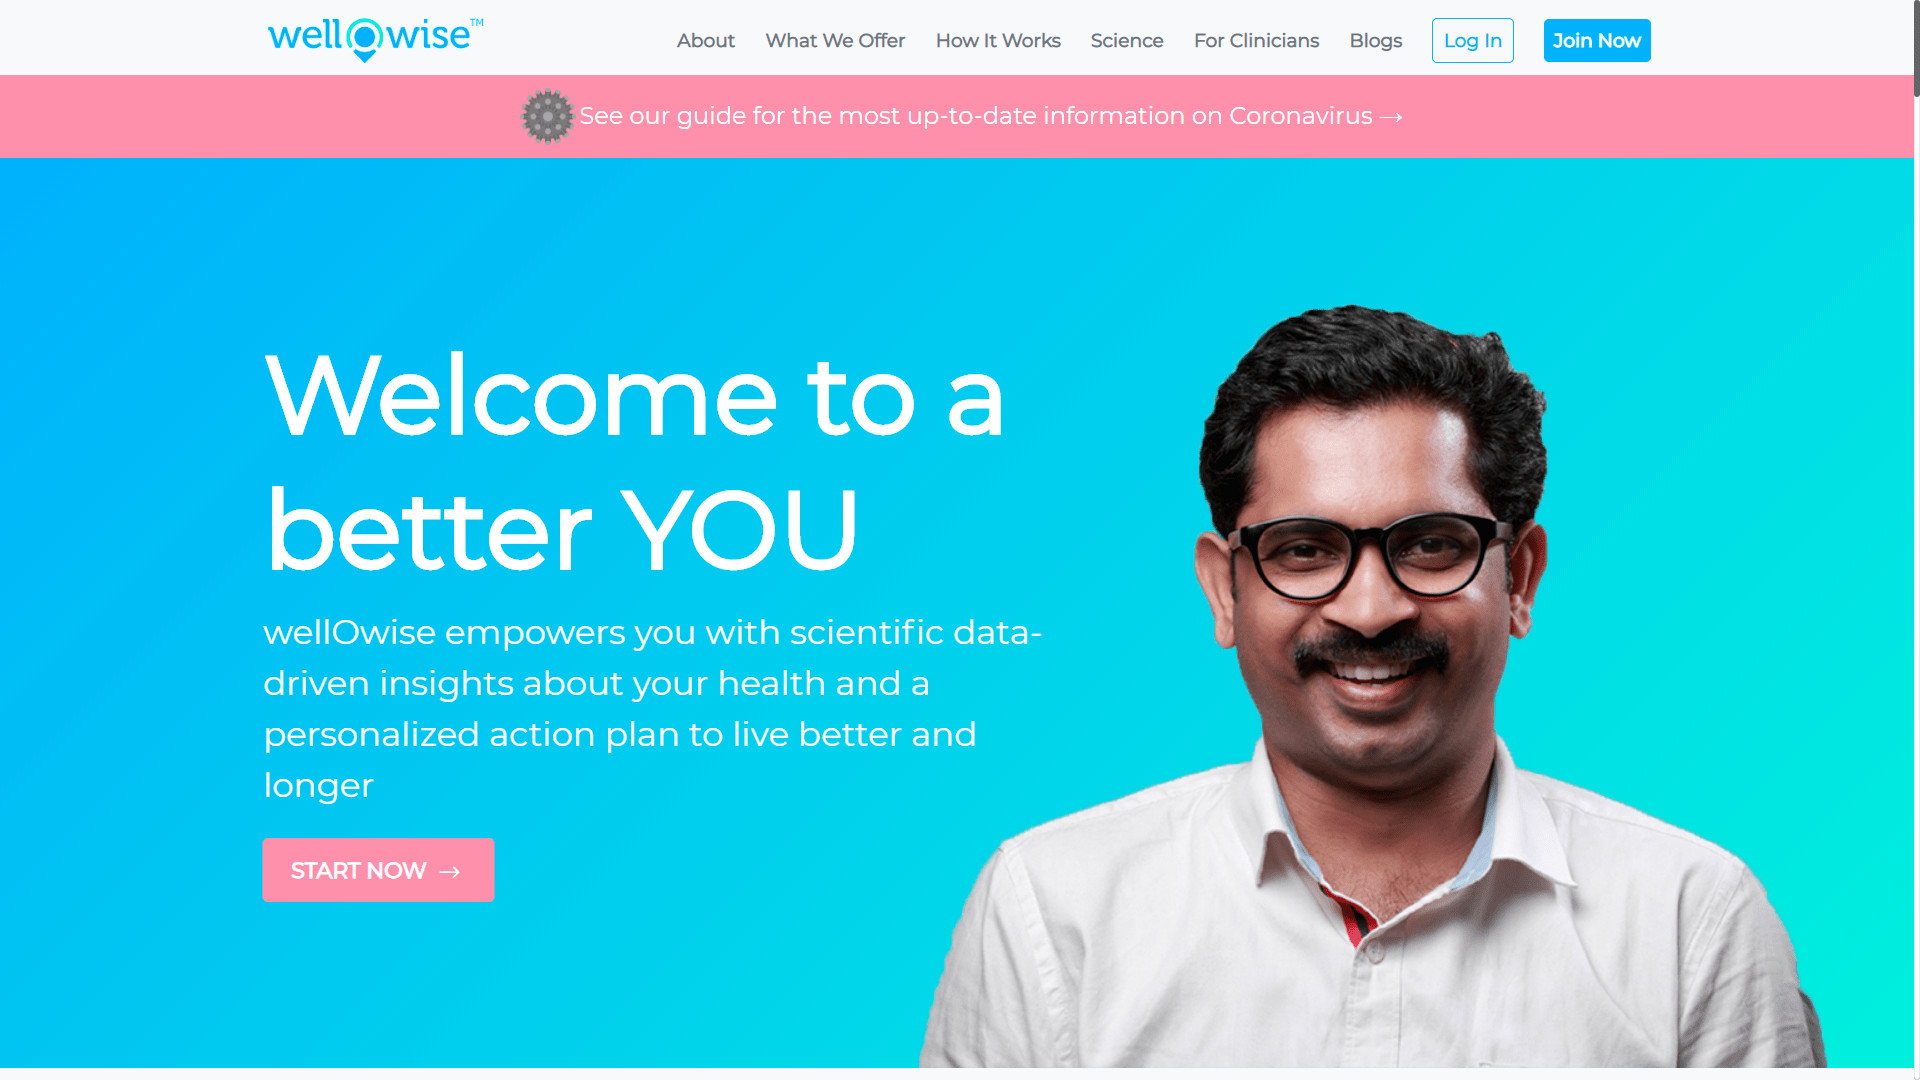 wellOwise: Precision health plans for a better you